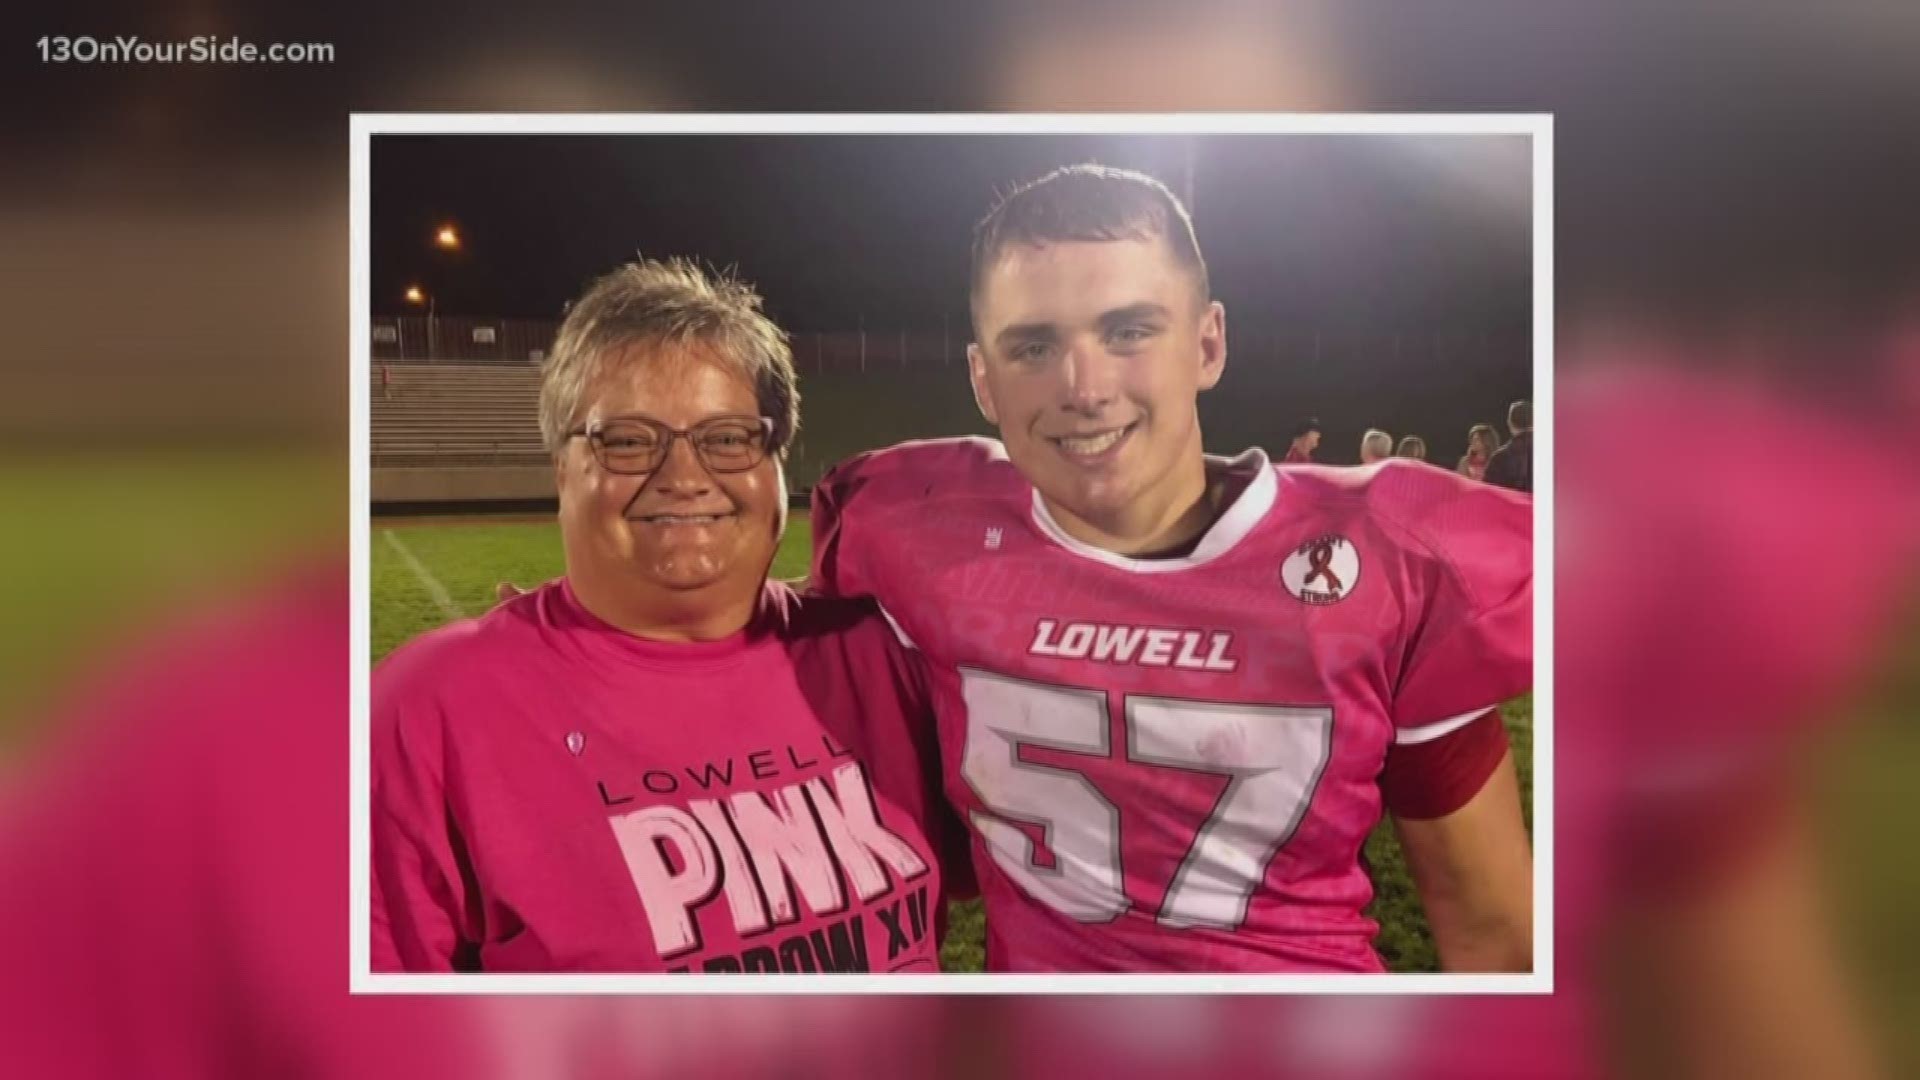 Though Grant Pratt's freshman, sophomore and junior year playing football for Lowell High School, he was battling cancer.